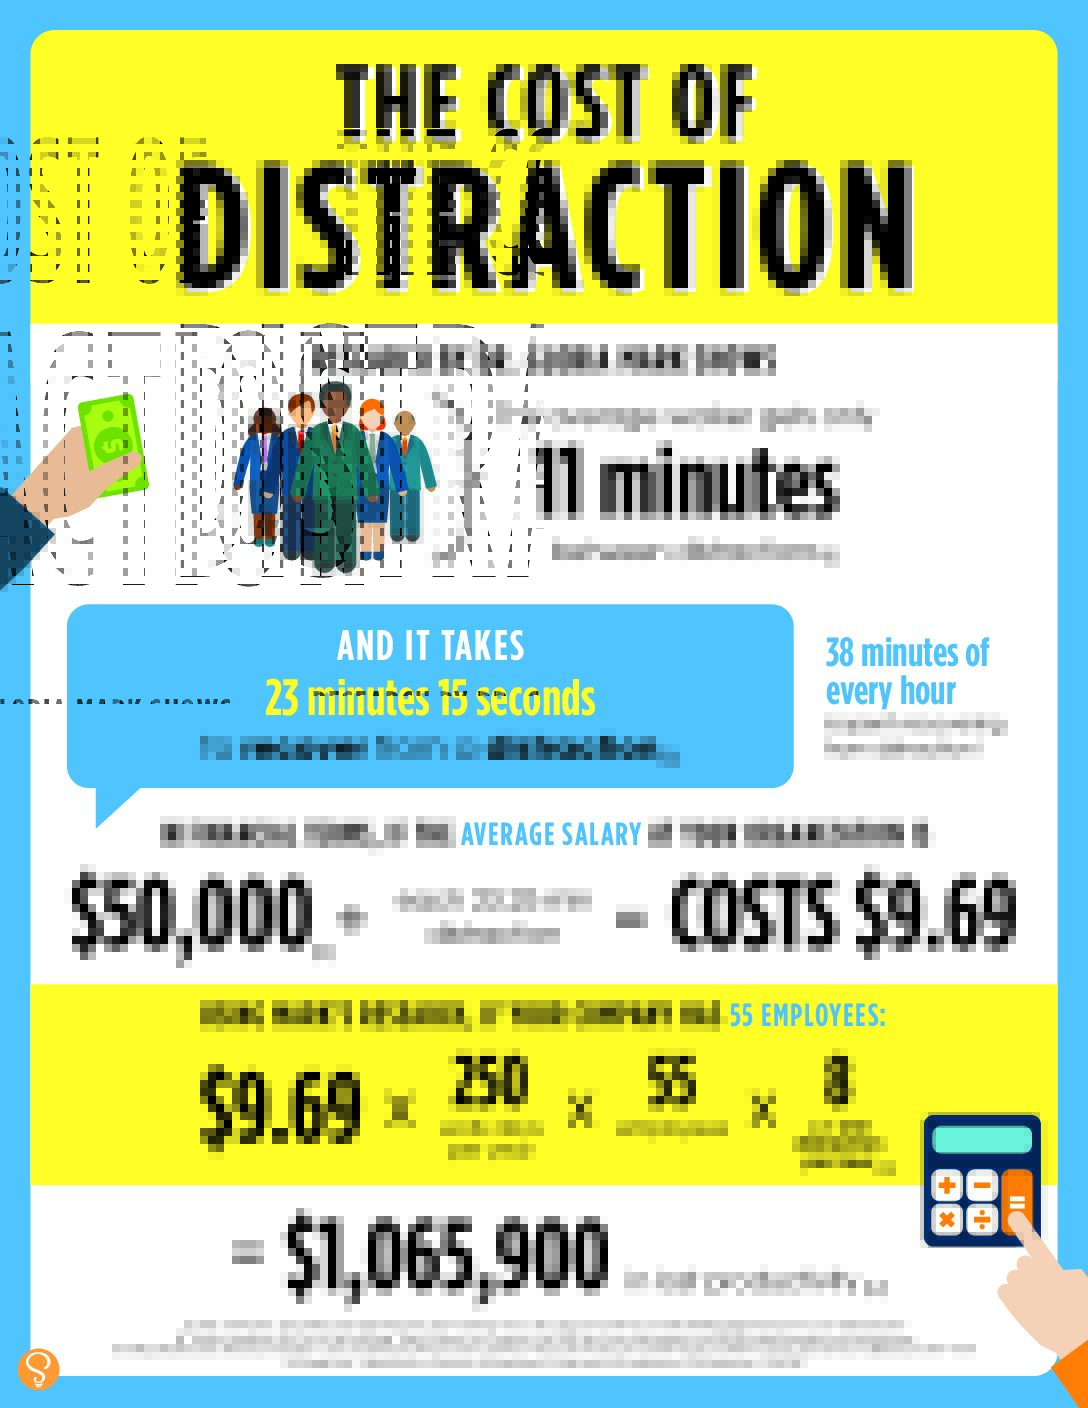 THIS Is What Distractions at Work Cost Your Company